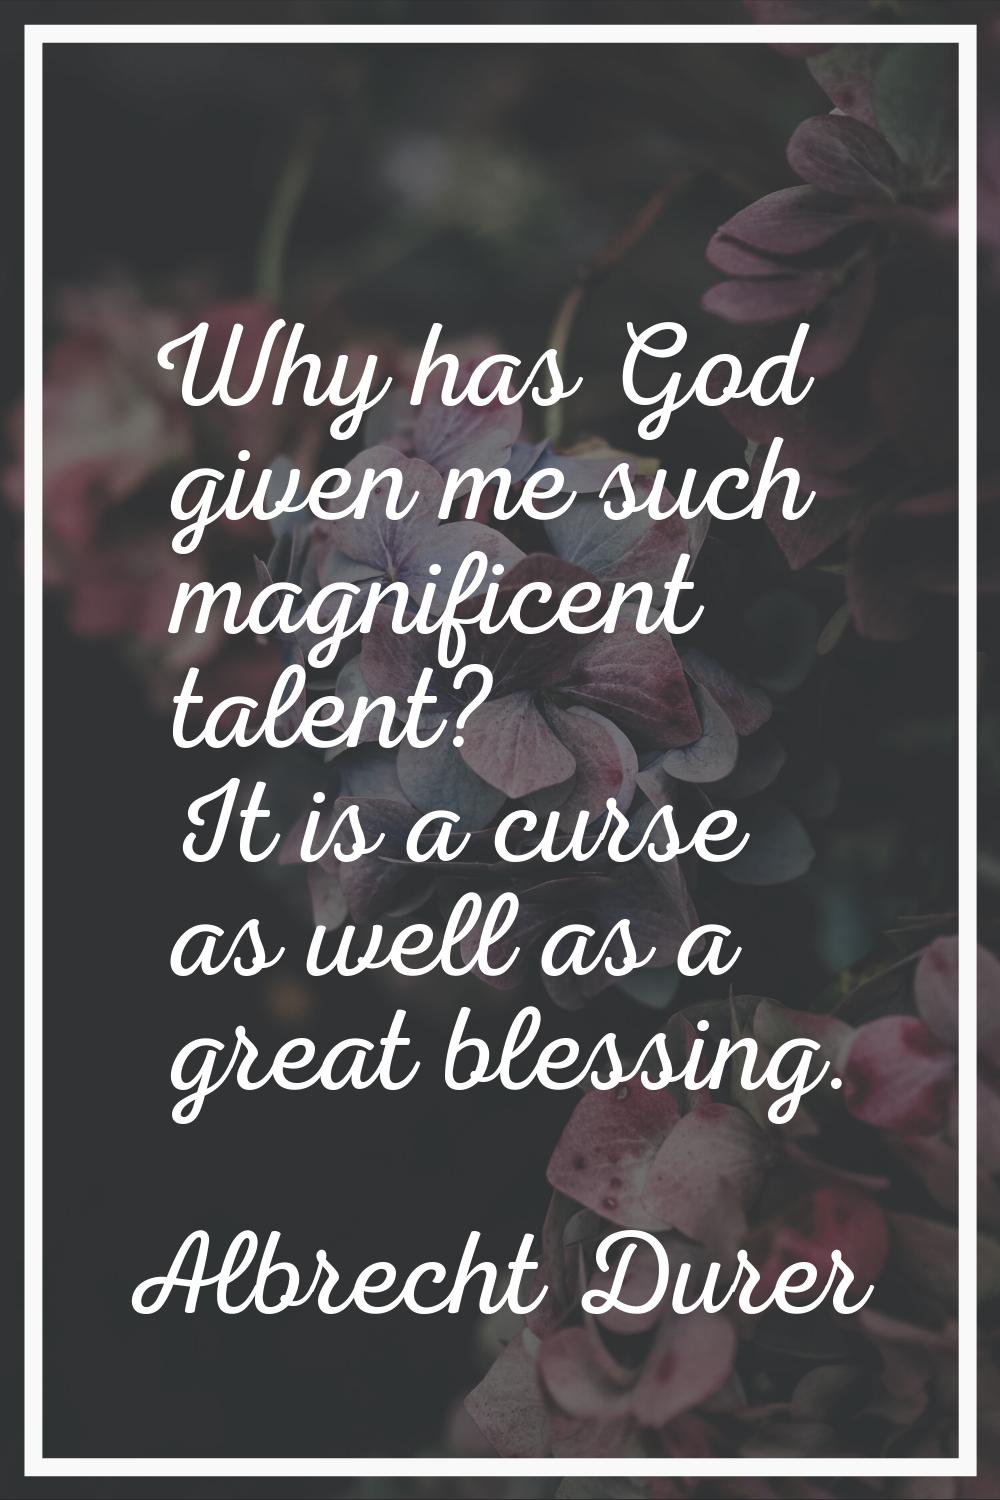 Why has God given me such magnificent talent? It is a curse as well as a great blessing.